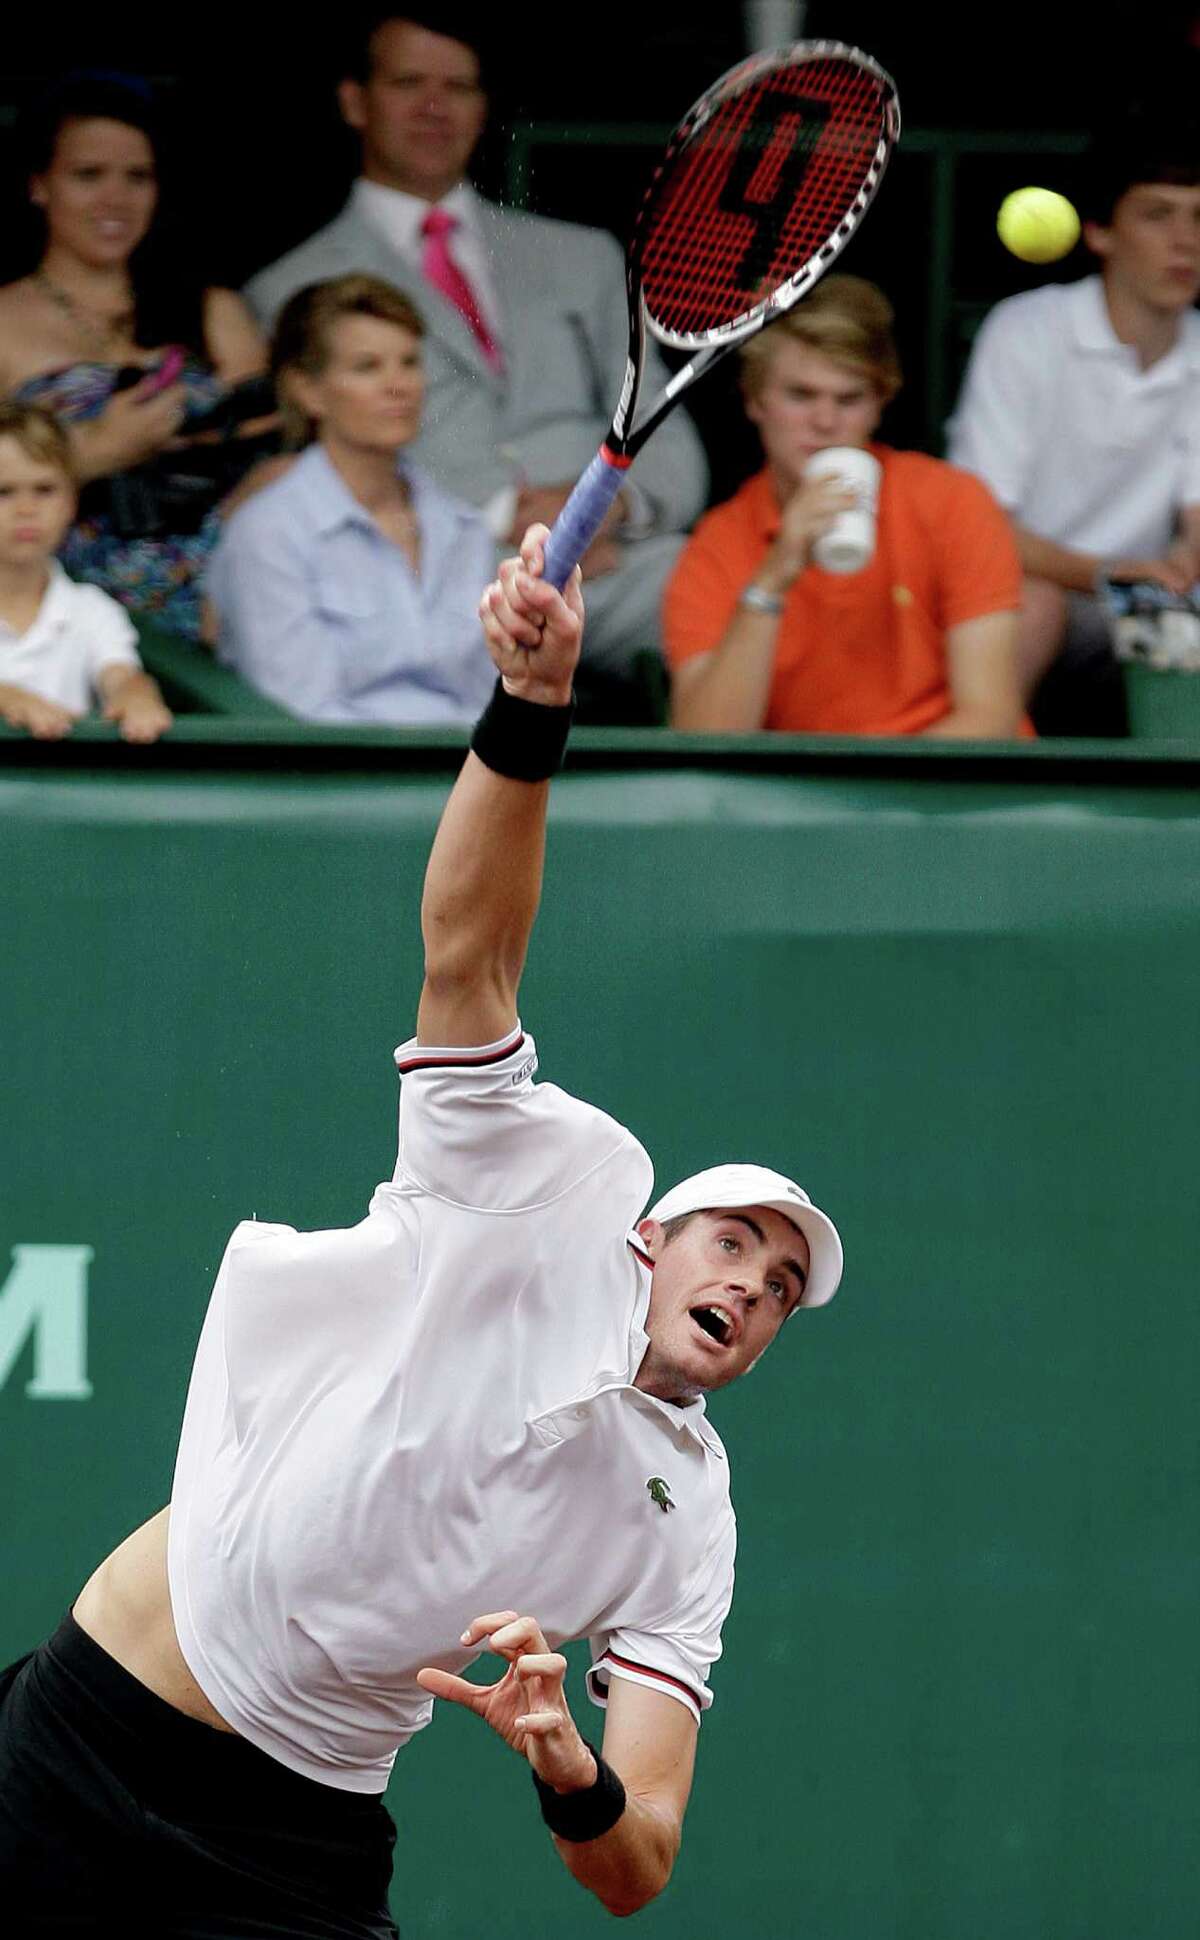 4/14/2012 : John Isner serves against Feliciano Lopez in the singles clay court semi finals at River Oaks Country Club in Houston, Texas. For the Chronicle: Thomas B. Shea